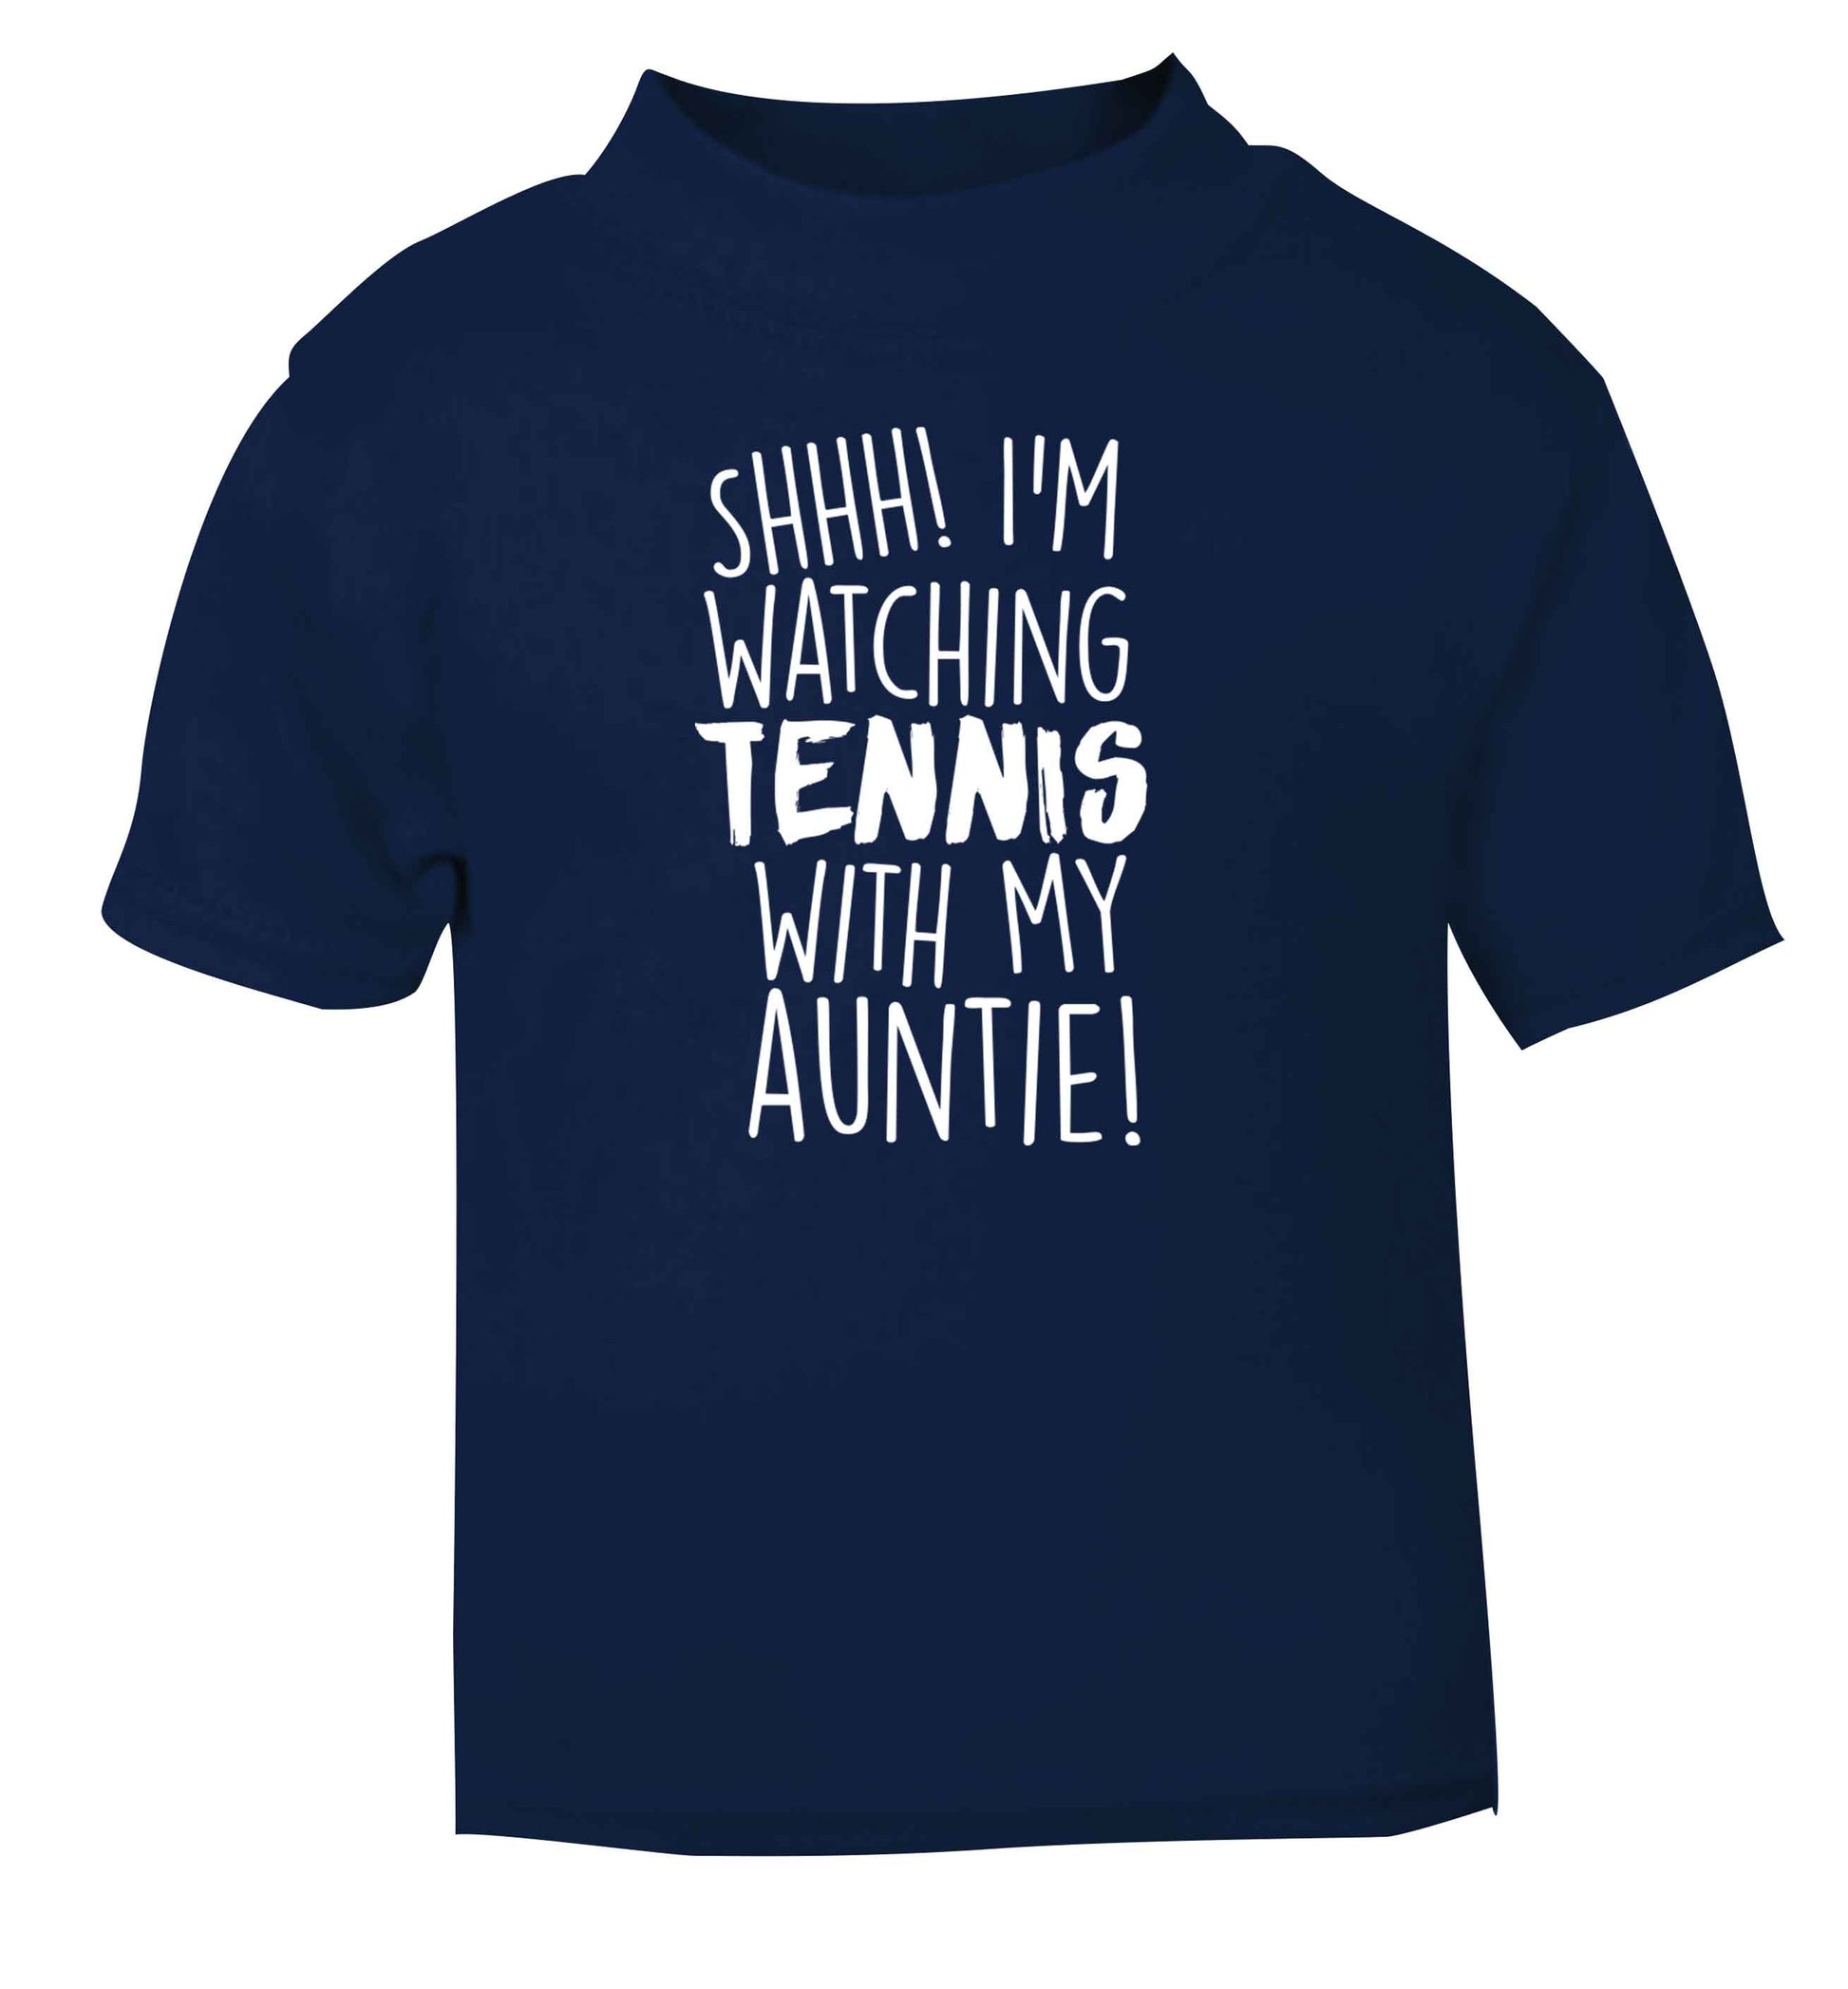 Shh! I'm watching tennis with my auntie! navy Baby Toddler Tshirt 2 Years